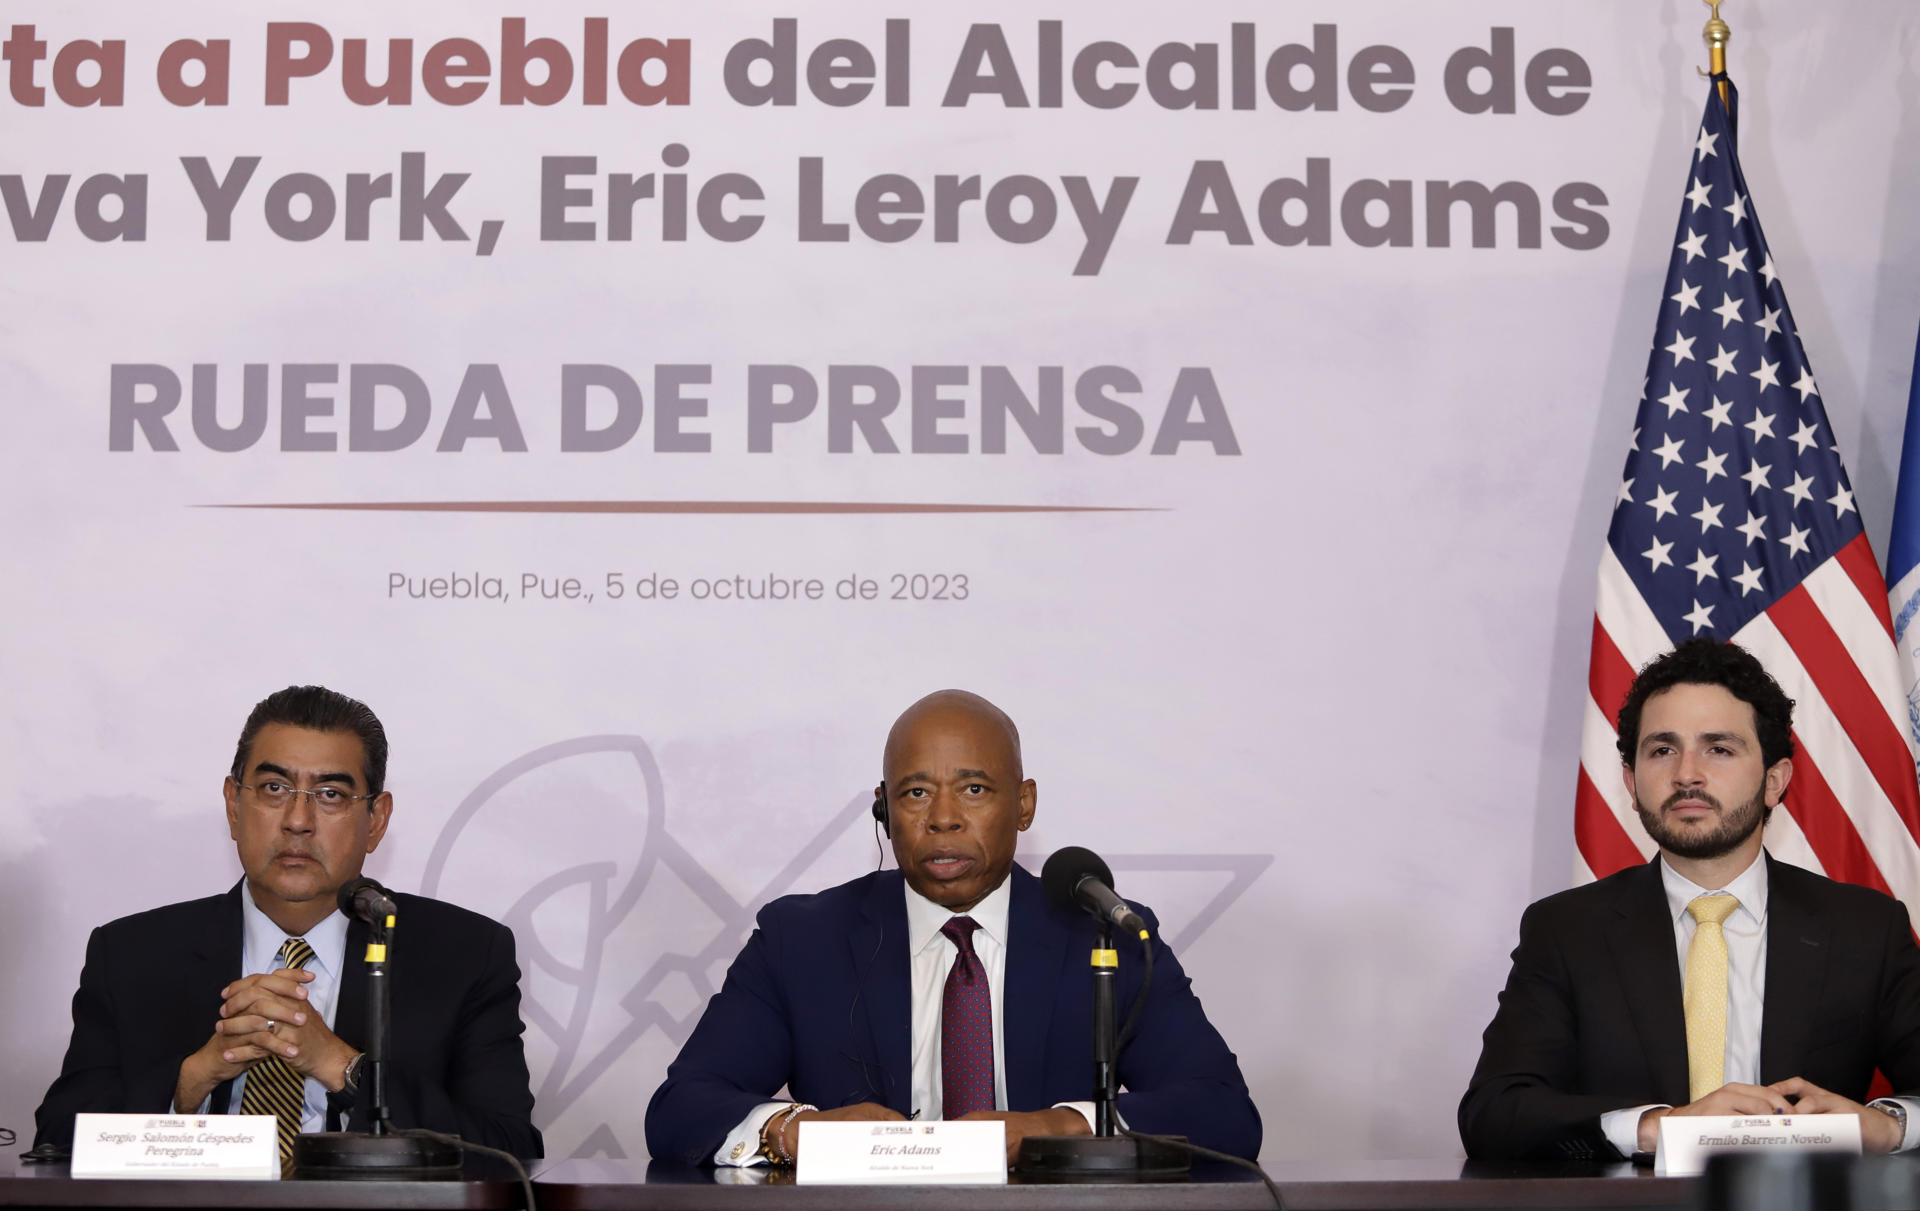 The governor of the state of Puebla, Sergio Salomón Céspedes (L), the mayor of New York, Eric Adams (C) and the state Secretary of Economy Ermilio Barrera (R) during a press conference in the city of Puebla, Mexico, 05 October 2023. EFE/Hilda Ríos
